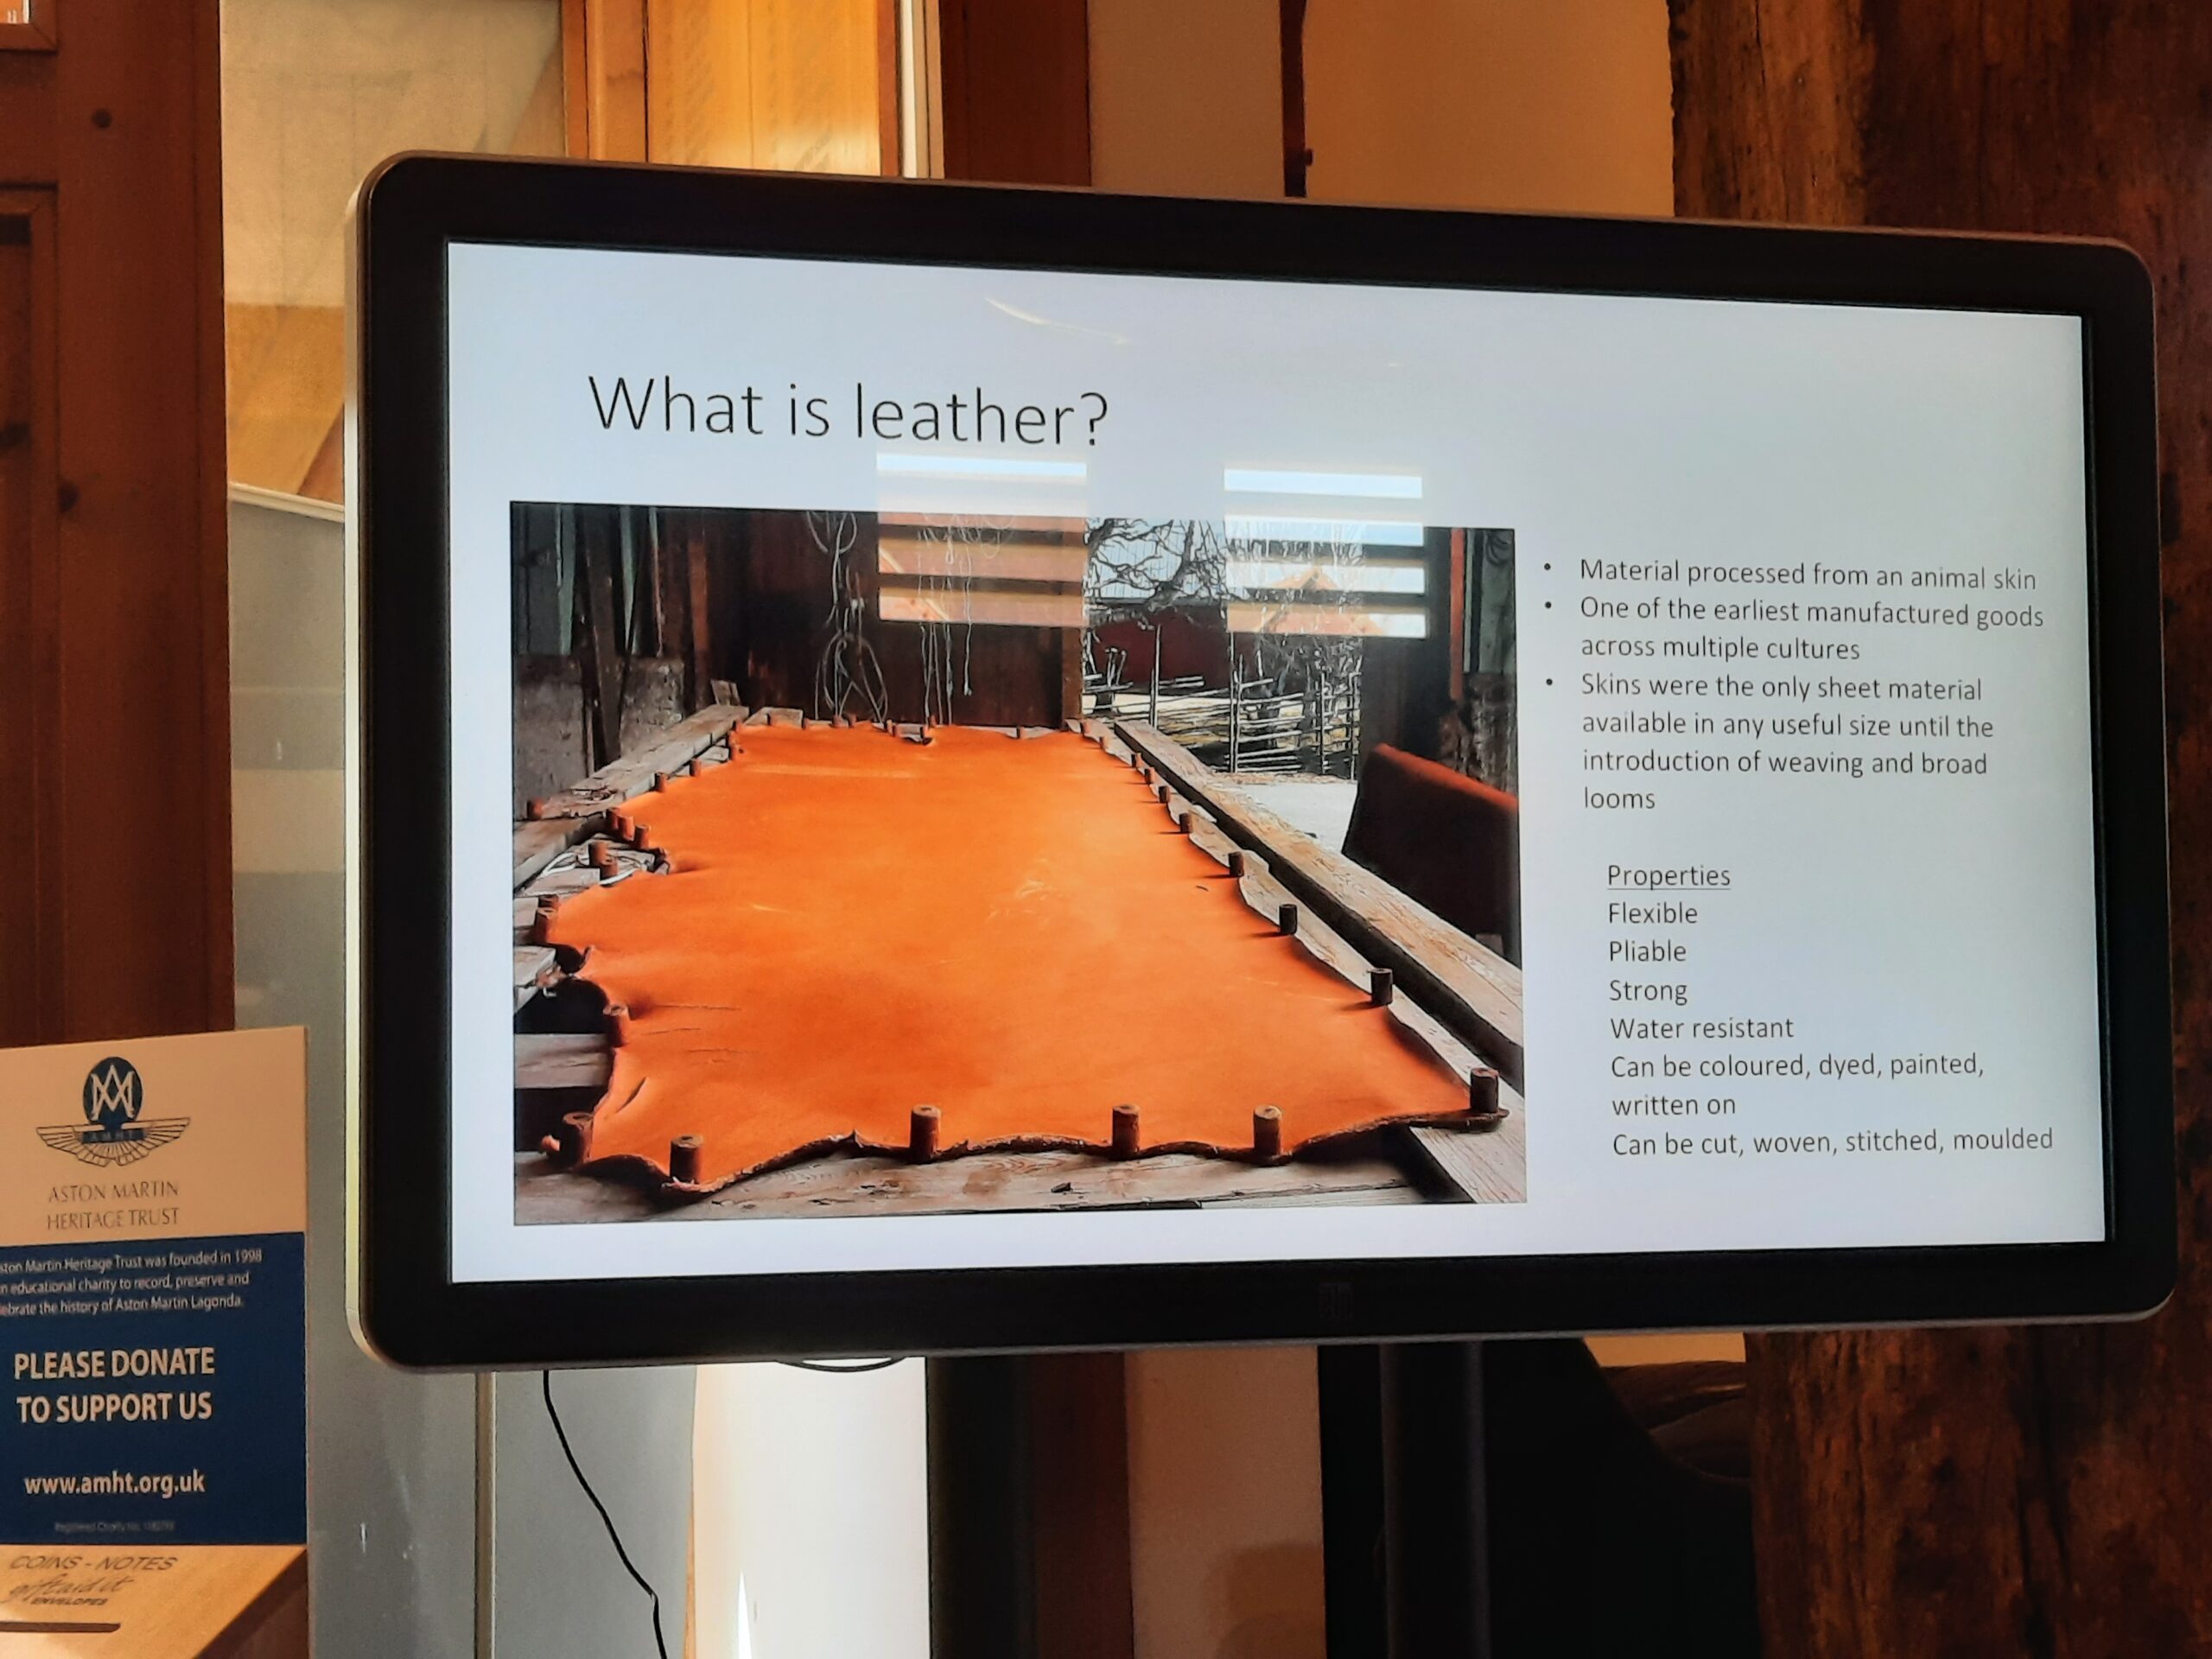 Presentation slide showing an image of a cows hide stretched out and bullet points explaining the properties of leather